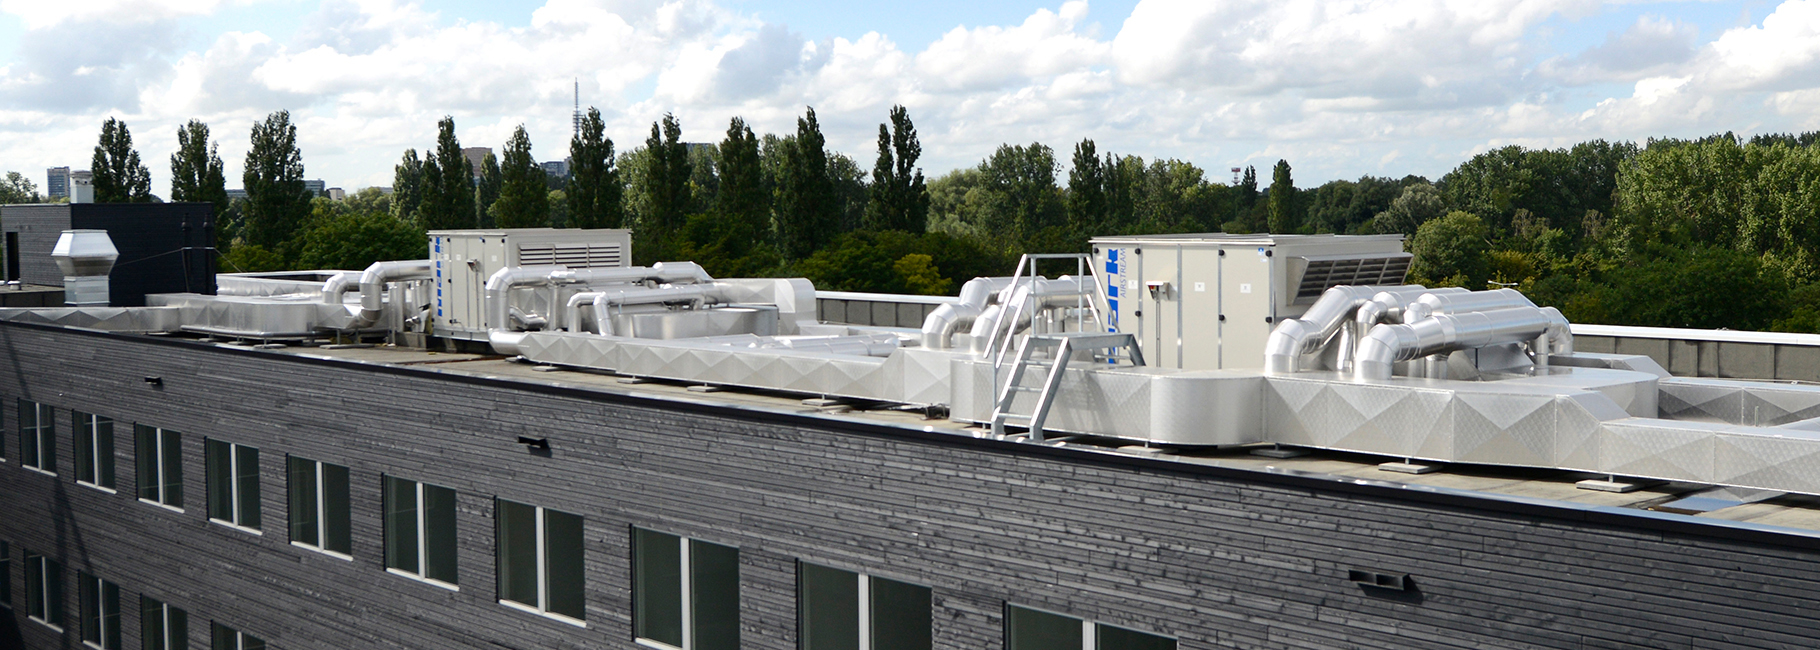 Student complex AmstelHome equipped with 5 heat recovery units from Mark